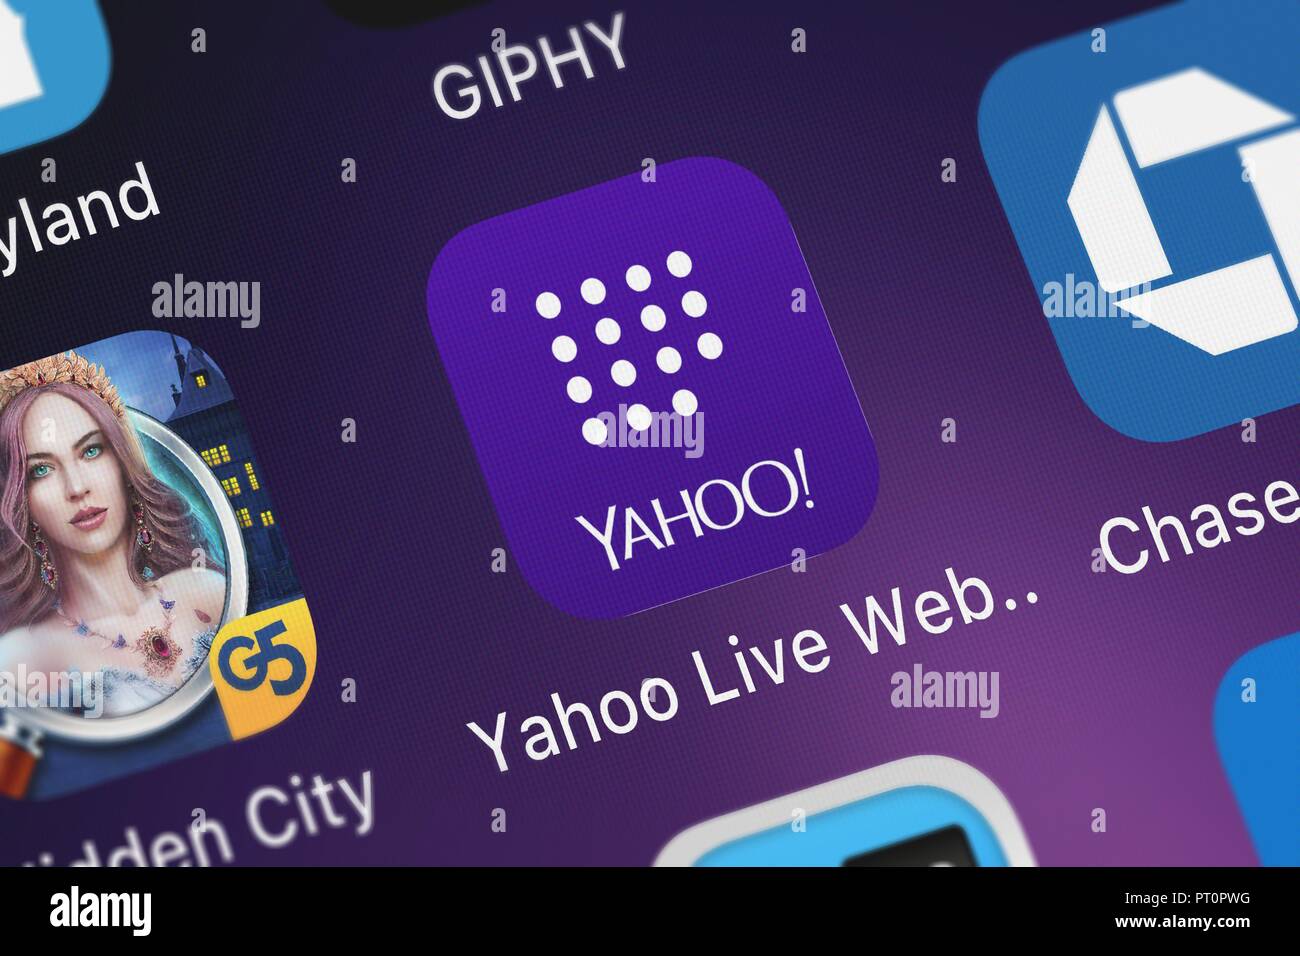 London, United Kingdom - October 05, 2018: Close-up shot of the Yahoo Live Web Insights application icon from Yahoo on an iPhone. Stock Photo